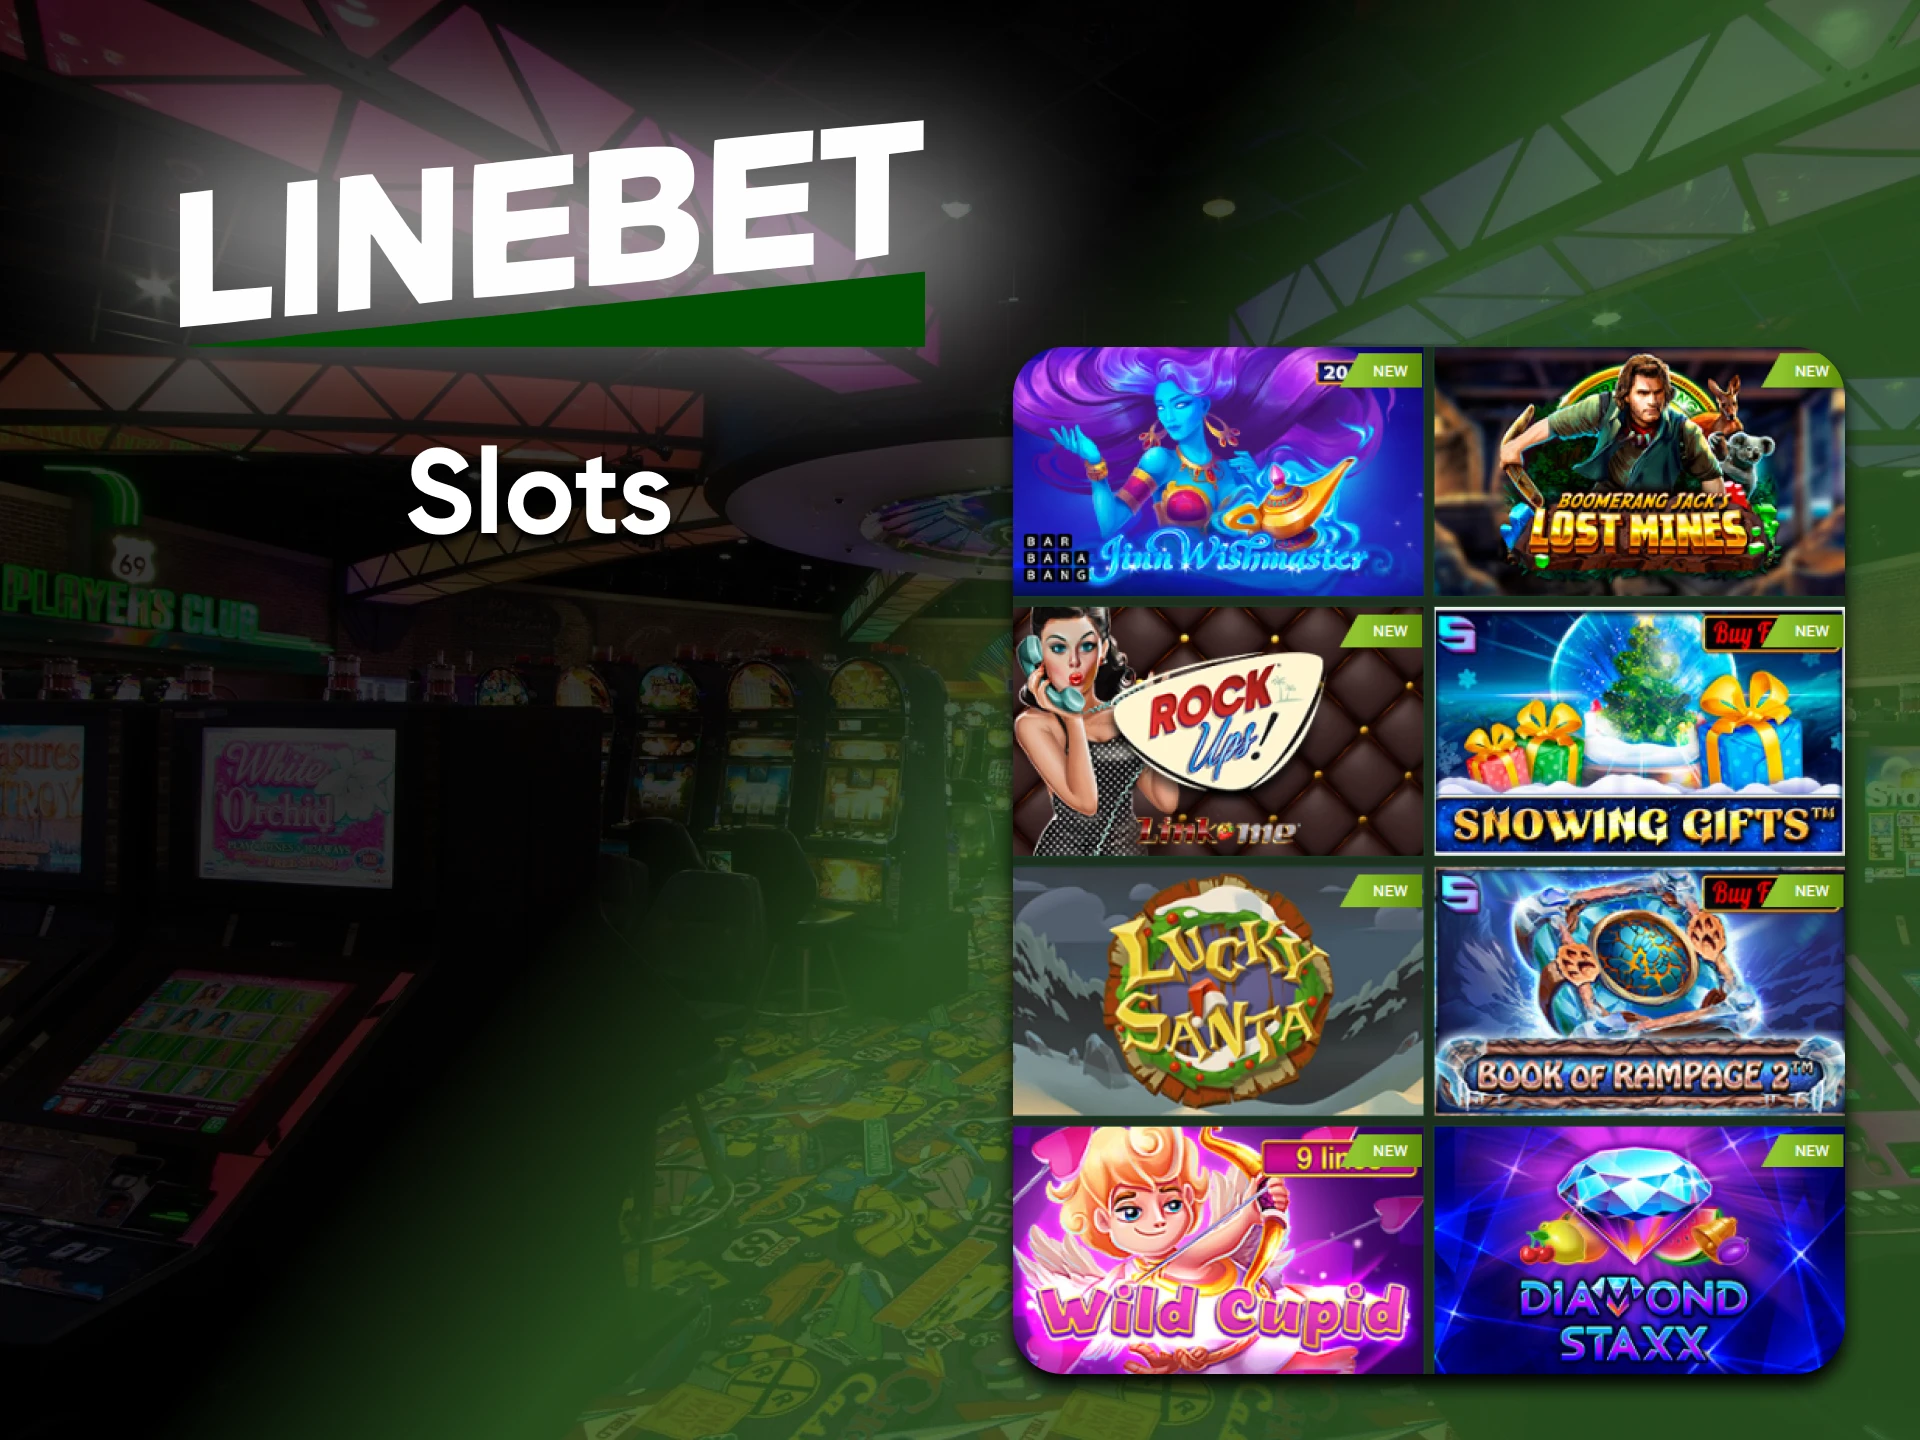 At Linebet casino you can play Slots.